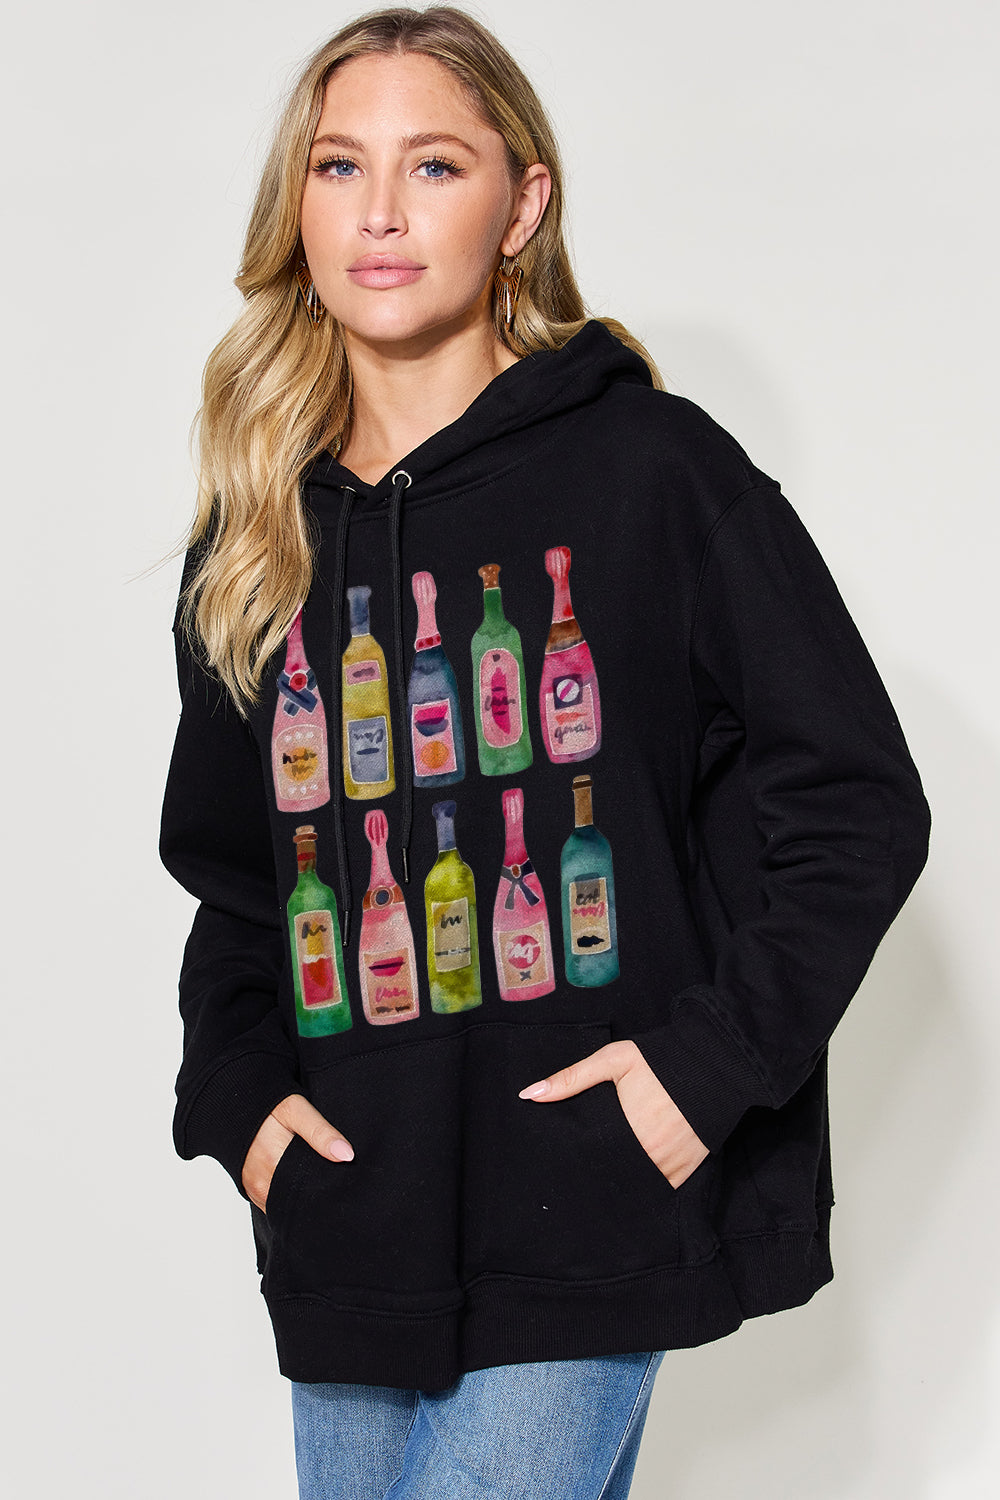 Simply Love Full Size Bottle Graphic Long Sleeve Drawstring Hoodie